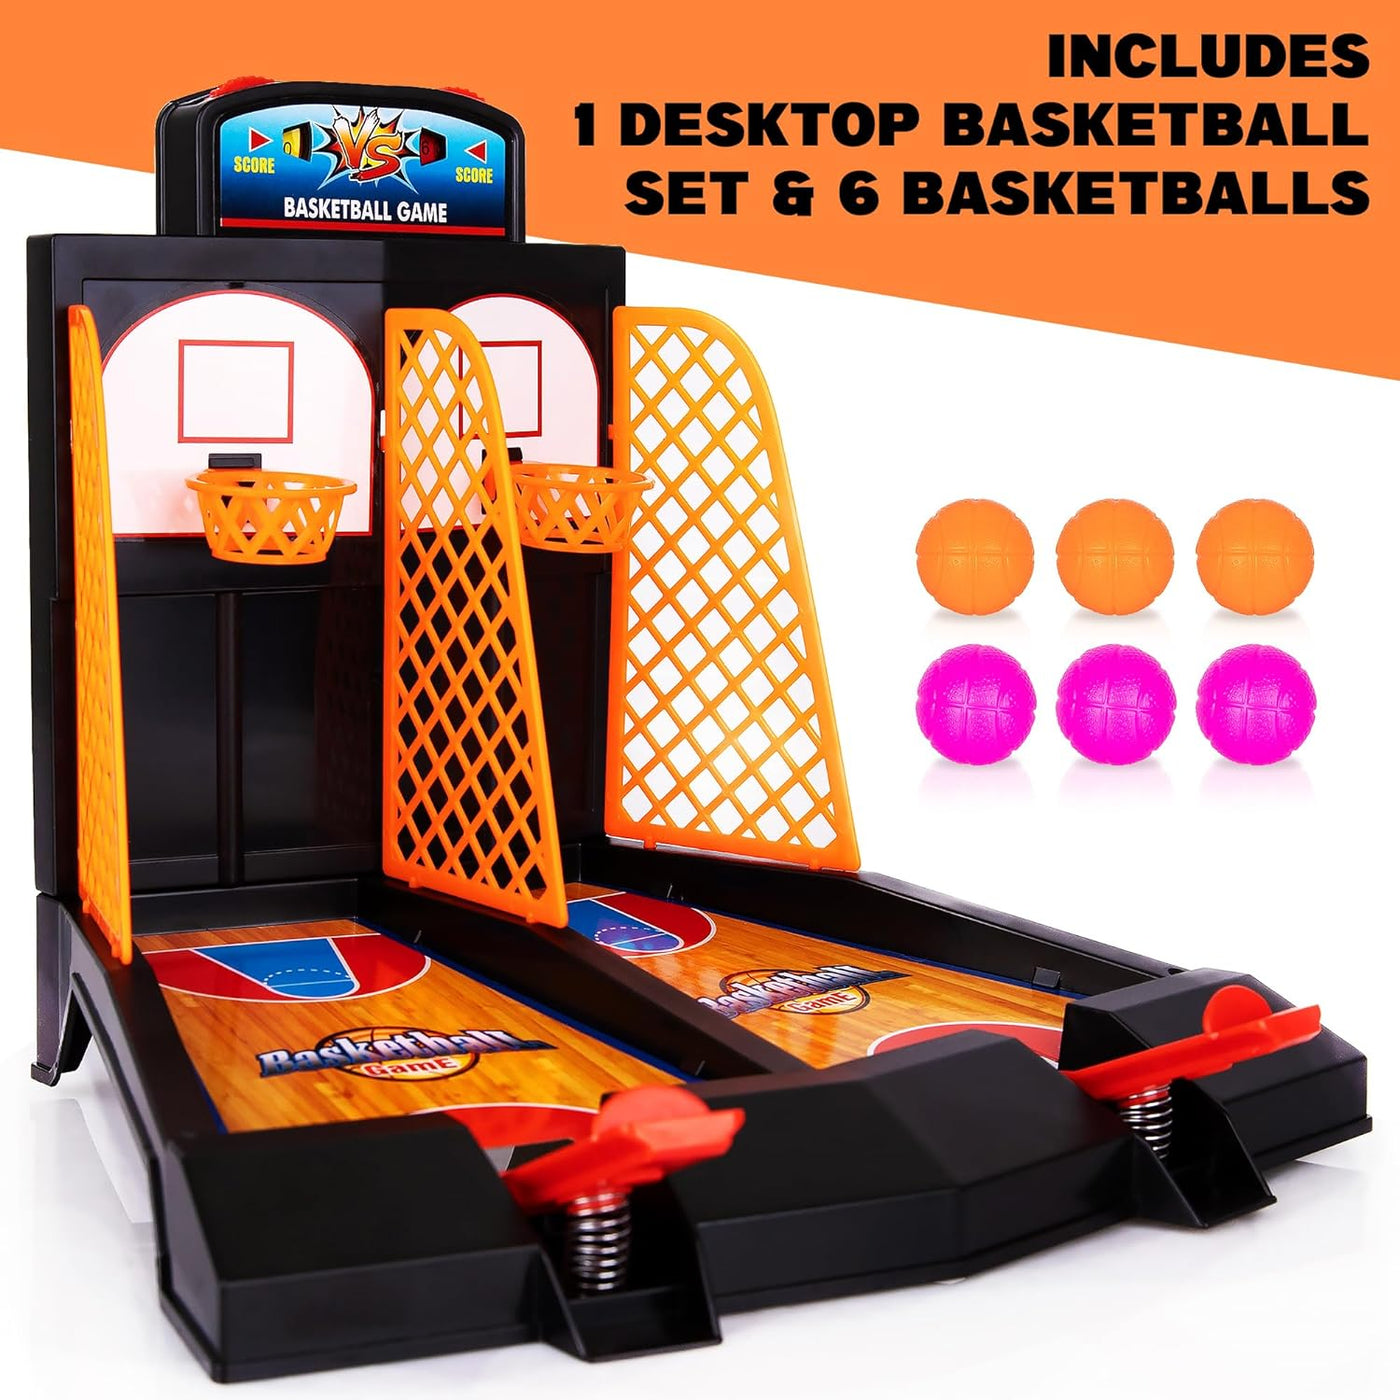 ArtCreativity Mini Basketball Game, Basketball Toys, Tabletop Basketball Games for Kids and Adults, Desk Games for Office, Best Basketball Gifts Idea for Boys, Girls, and Adults